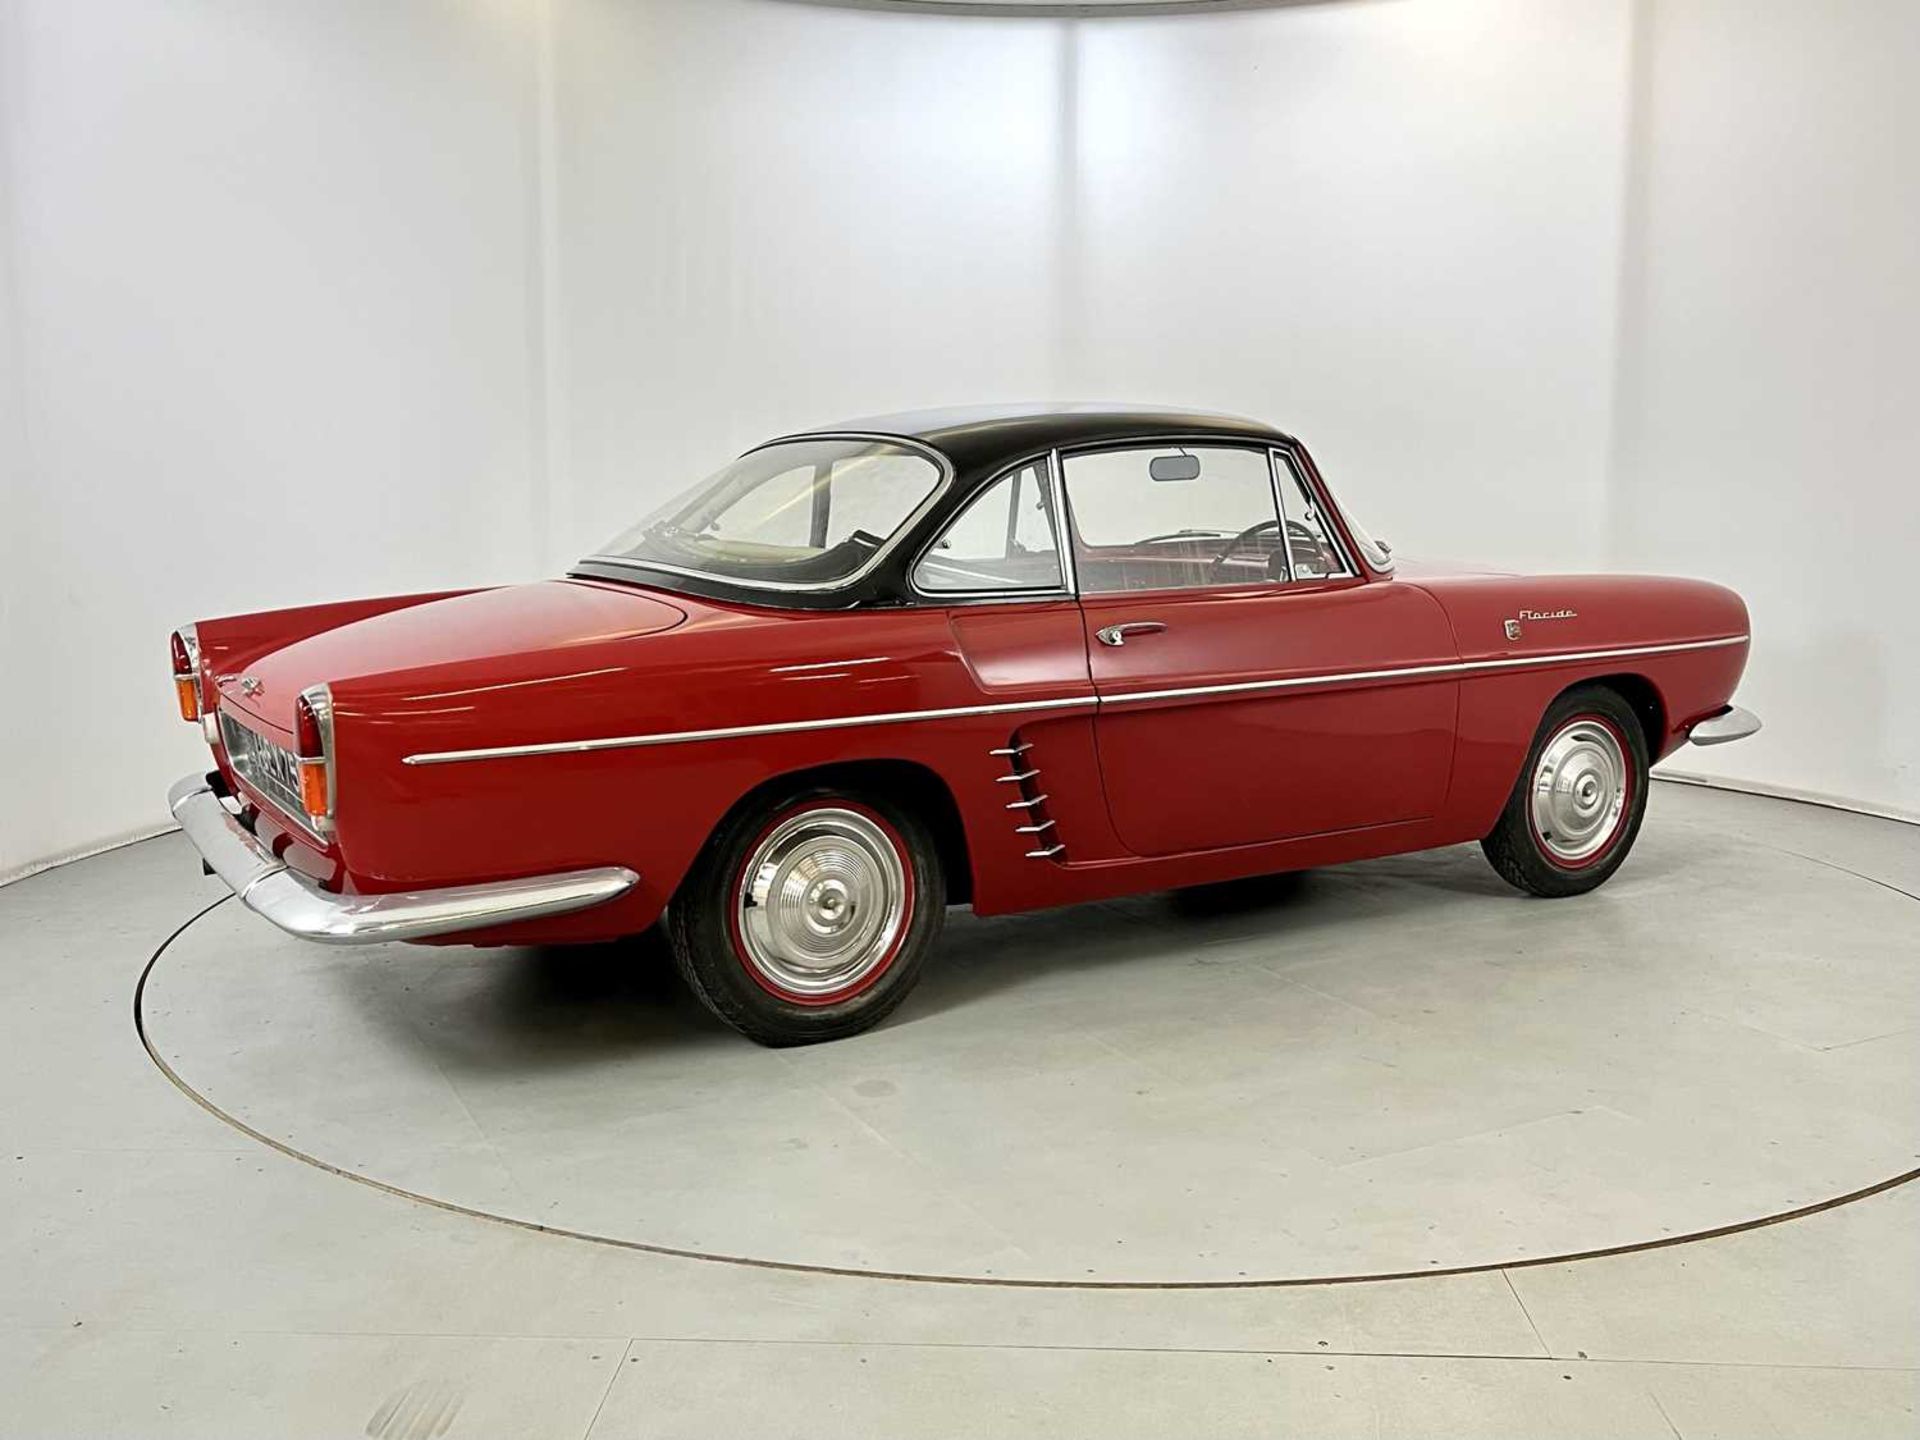 1962 Renault Floride Convertible - Image 10 of 43